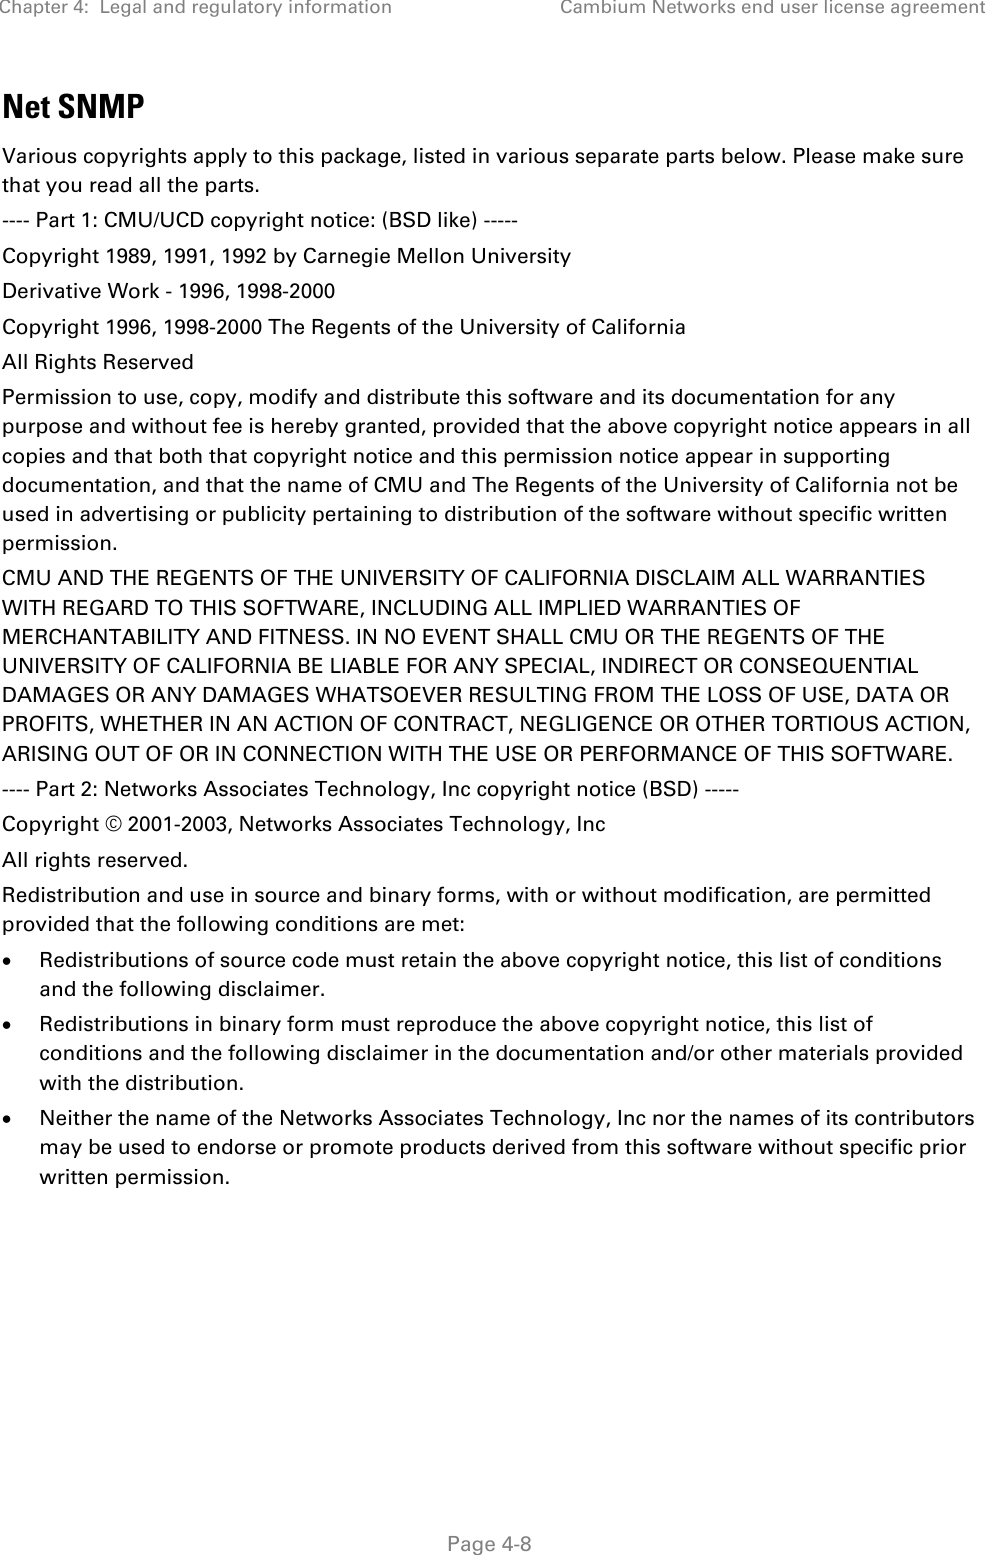 Chapter 4:  Legal and regulatory information Cambium Networks end user license agreement   Page 4-8 Net SNMP Various copyrights apply to this package, listed in various separate parts below. Please make sure that you read all the parts. ---- Part 1: CMU/UCD copyright notice: (BSD like) ----- Copyright 1989, 1991, 1992 by Carnegie Mellon University Derivative Work - 1996, 1998-2000 Copyright 1996, 1998-2000 The Regents of the University of California All Rights Reserved Permission to use, copy, modify and distribute this software and its documentation for any purpose and without fee is hereby granted, provided that the above copyright notice appears in all copies and that both that copyright notice and this permission notice appear in supporting documentation, and that the name of CMU and The Regents of the University of California not be used in advertising or publicity pertaining to distribution of the software without specific written permission. CMU AND THE REGENTS OF THE UNIVERSITY OF CALIFORNIA DISCLAIM ALL WARRANTIES WITH REGARD TO THIS SOFTWARE, INCLUDING ALL IMPLIED WARRANTIES OF MERCHANTABILITY AND FITNESS. IN NO EVENT SHALL CMU OR THE REGENTS OF THE UNIVERSITY OF CALIFORNIA BE LIABLE FOR ANY SPECIAL, INDIRECT OR CONSEQUENTIAL DAMAGES OR ANY DAMAGES WHATSOEVER RESULTING FROM THE LOSS OF USE, DATA OR PROFITS, WHETHER IN AN ACTION OF CONTRACT, NEGLIGENCE OR OTHER TORTIOUS ACTION, ARISING OUT OF OR IN CONNECTION WITH THE USE OR PERFORMANCE OF THIS SOFTWARE. ---- Part 2: Networks Associates Technology, Inc copyright notice (BSD) ----- Copyright © 2001-2003, Networks Associates Technology, Inc All rights reserved. Redistribution and use in source and binary forms, with or without modification, are permitted provided that the following conditions are met: • Redistributions of source code must retain the above copyright notice, this list of conditions and the following disclaimer. • Redistributions in binary form must reproduce the above copyright notice, this list of conditions and the following disclaimer in the documentation and/or other materials provided with the distribution. • Neither the name of the Networks Associates Technology, Inc nor the names of its contributors may be used to endorse or promote products derived from this software without specific prior written permission. 